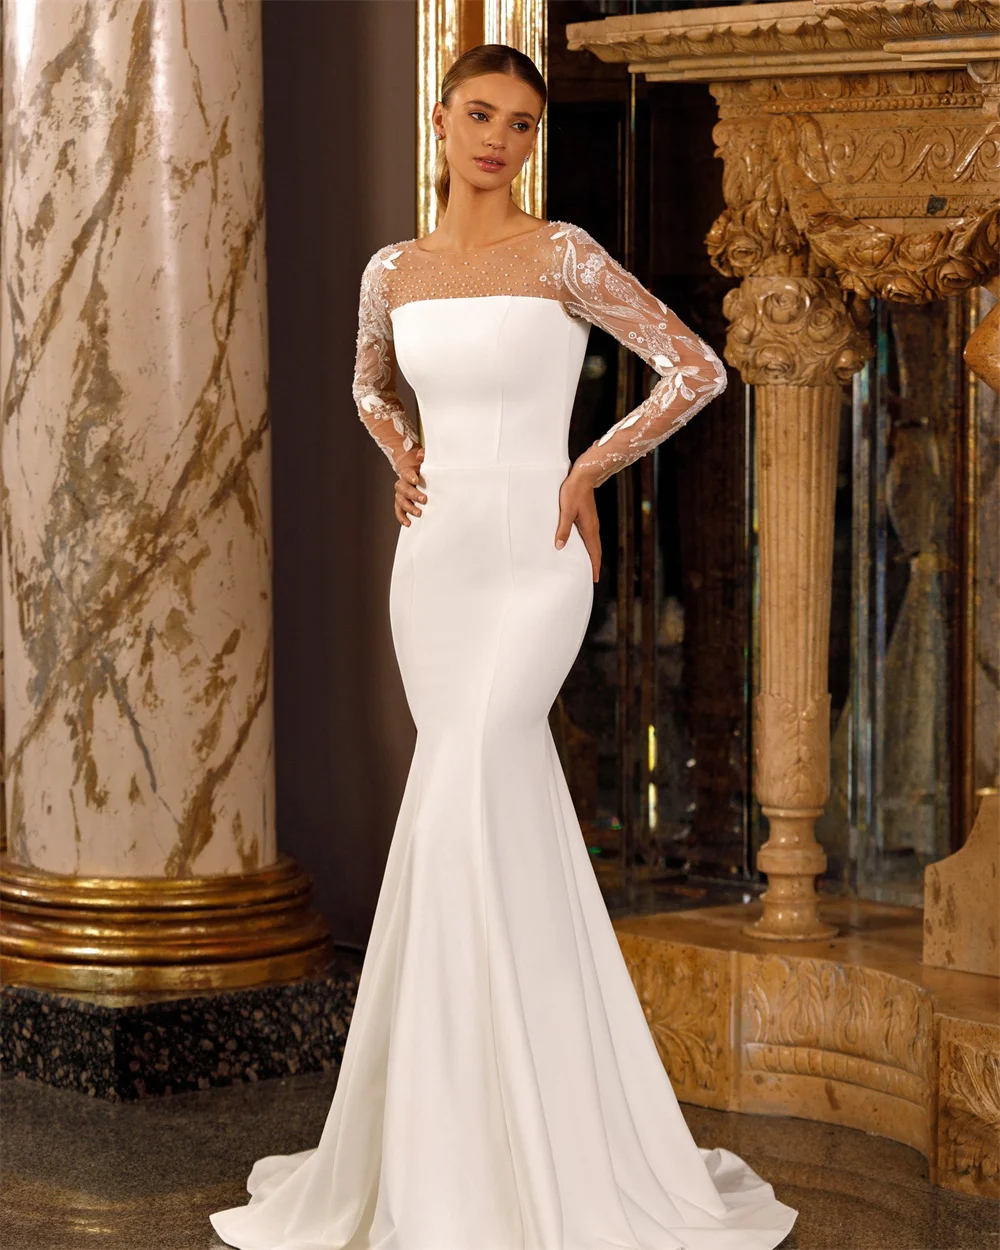 

MULOONG White O Neck Full Sleeve Appliques Sequined Mermaid Wedding Dress Floor Length Sweep Train Backless Elegant Gown New